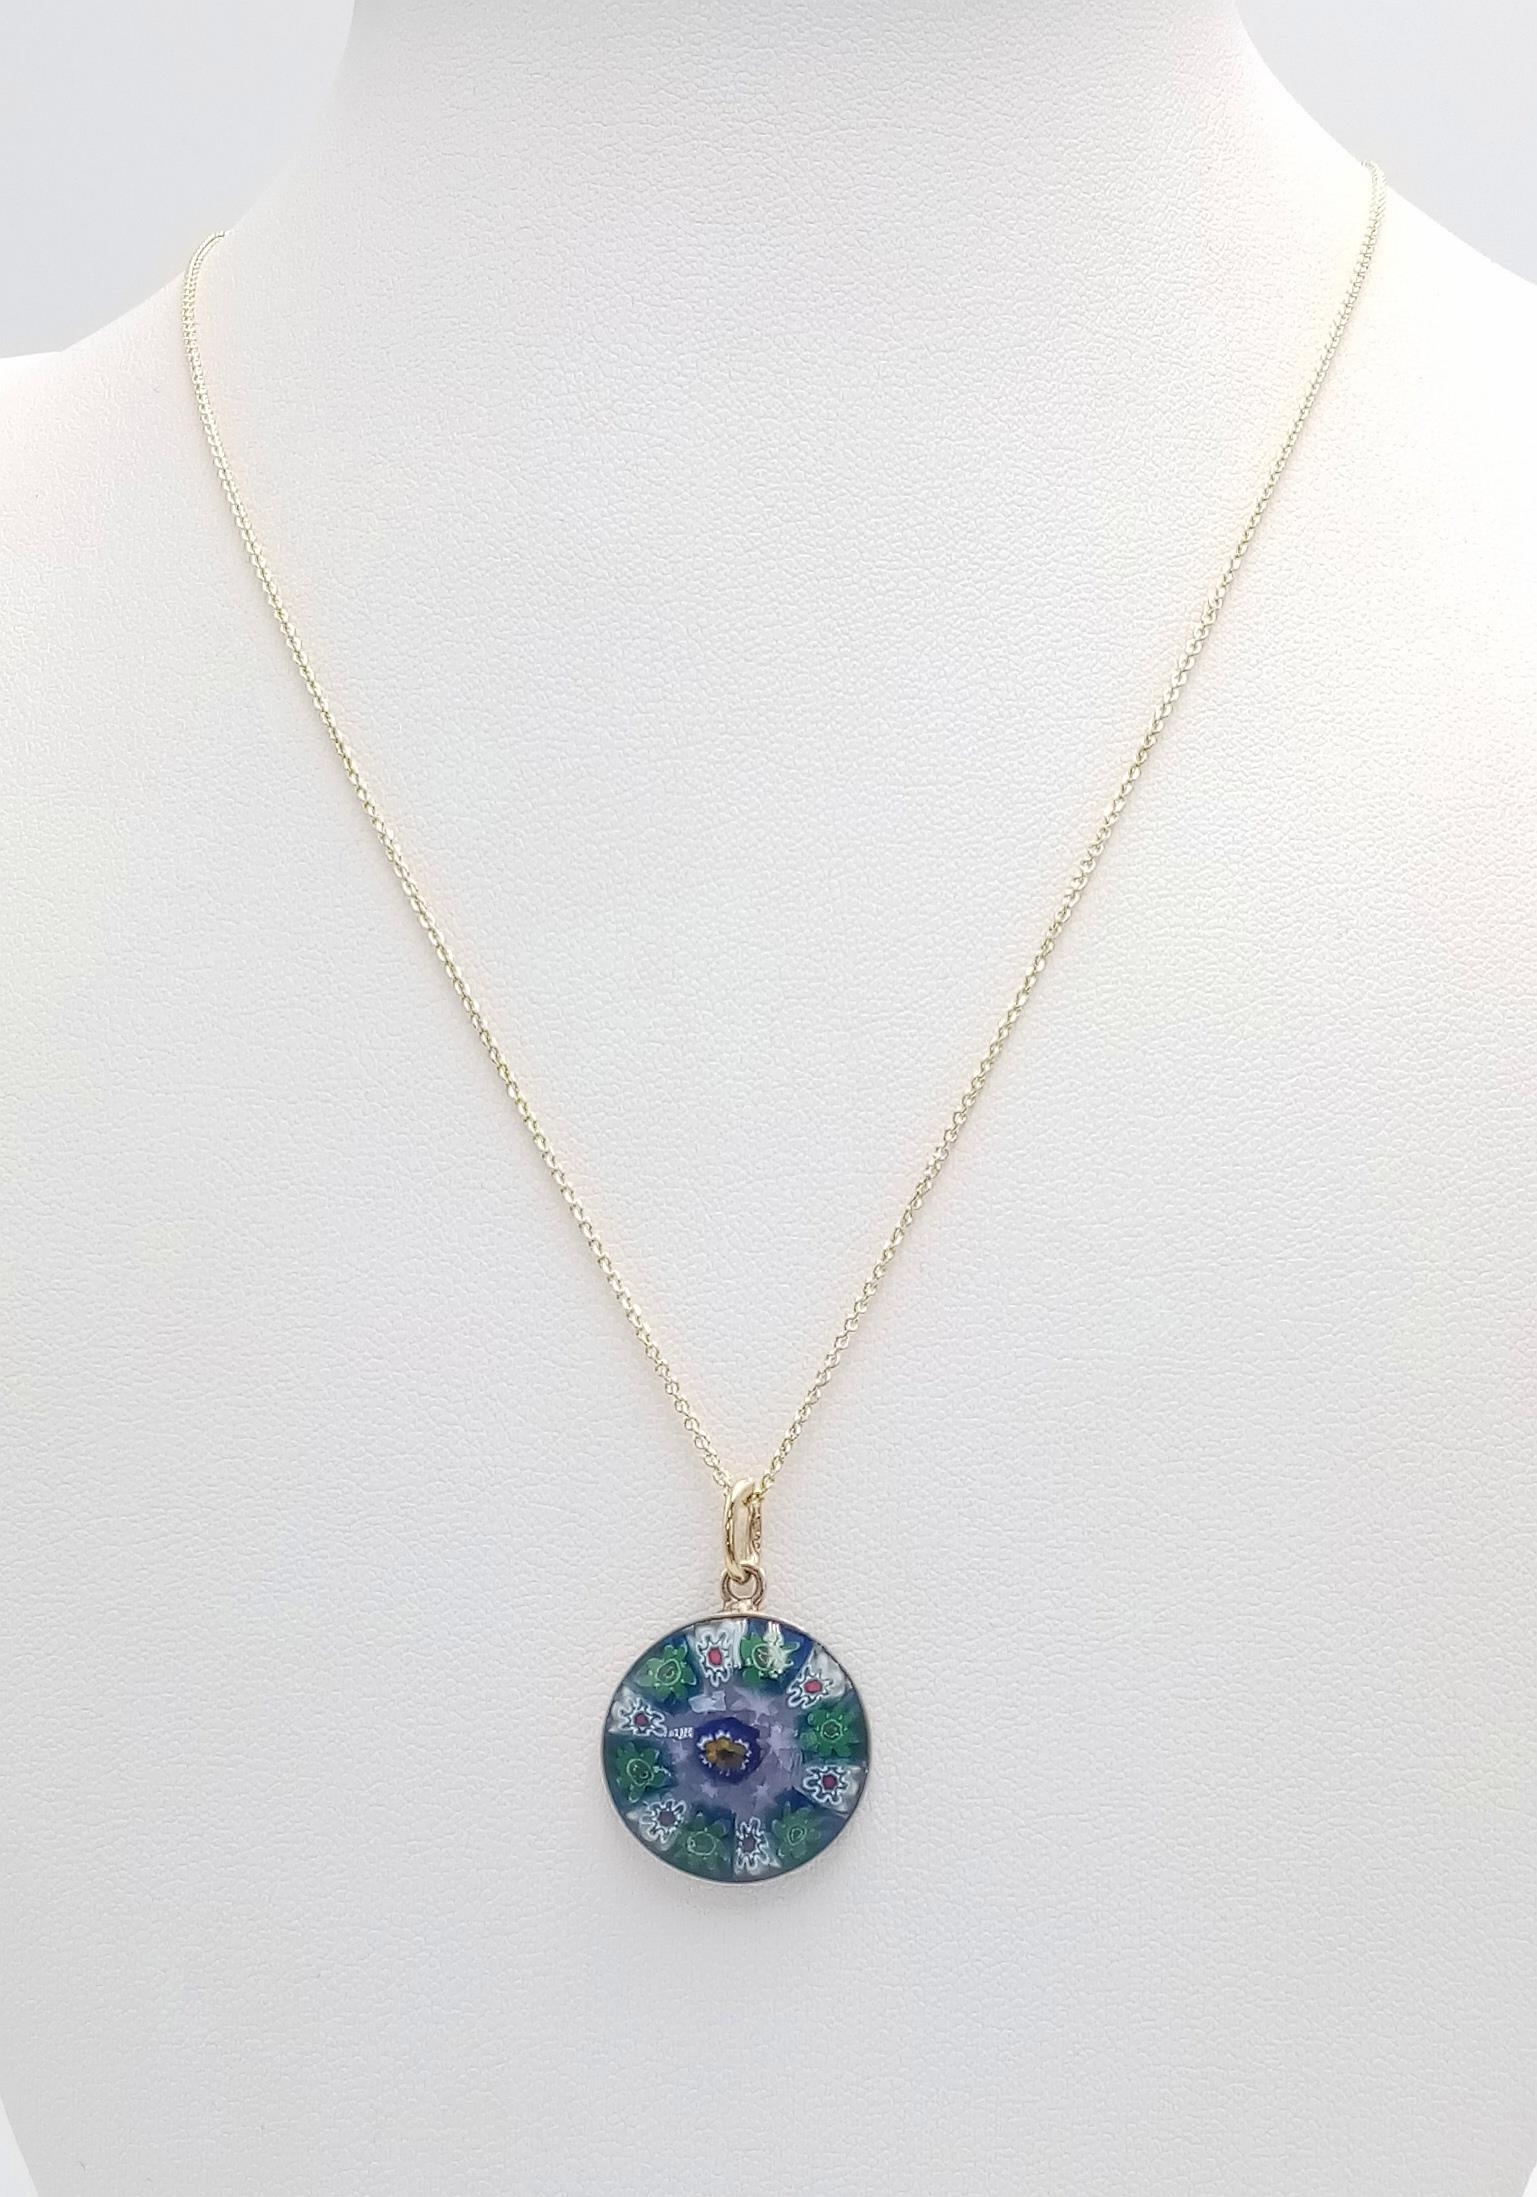 An Excellent Condition, Vintage, Yellow Gold Gilt (On Silver) Italian Millefiori Glass Pendant